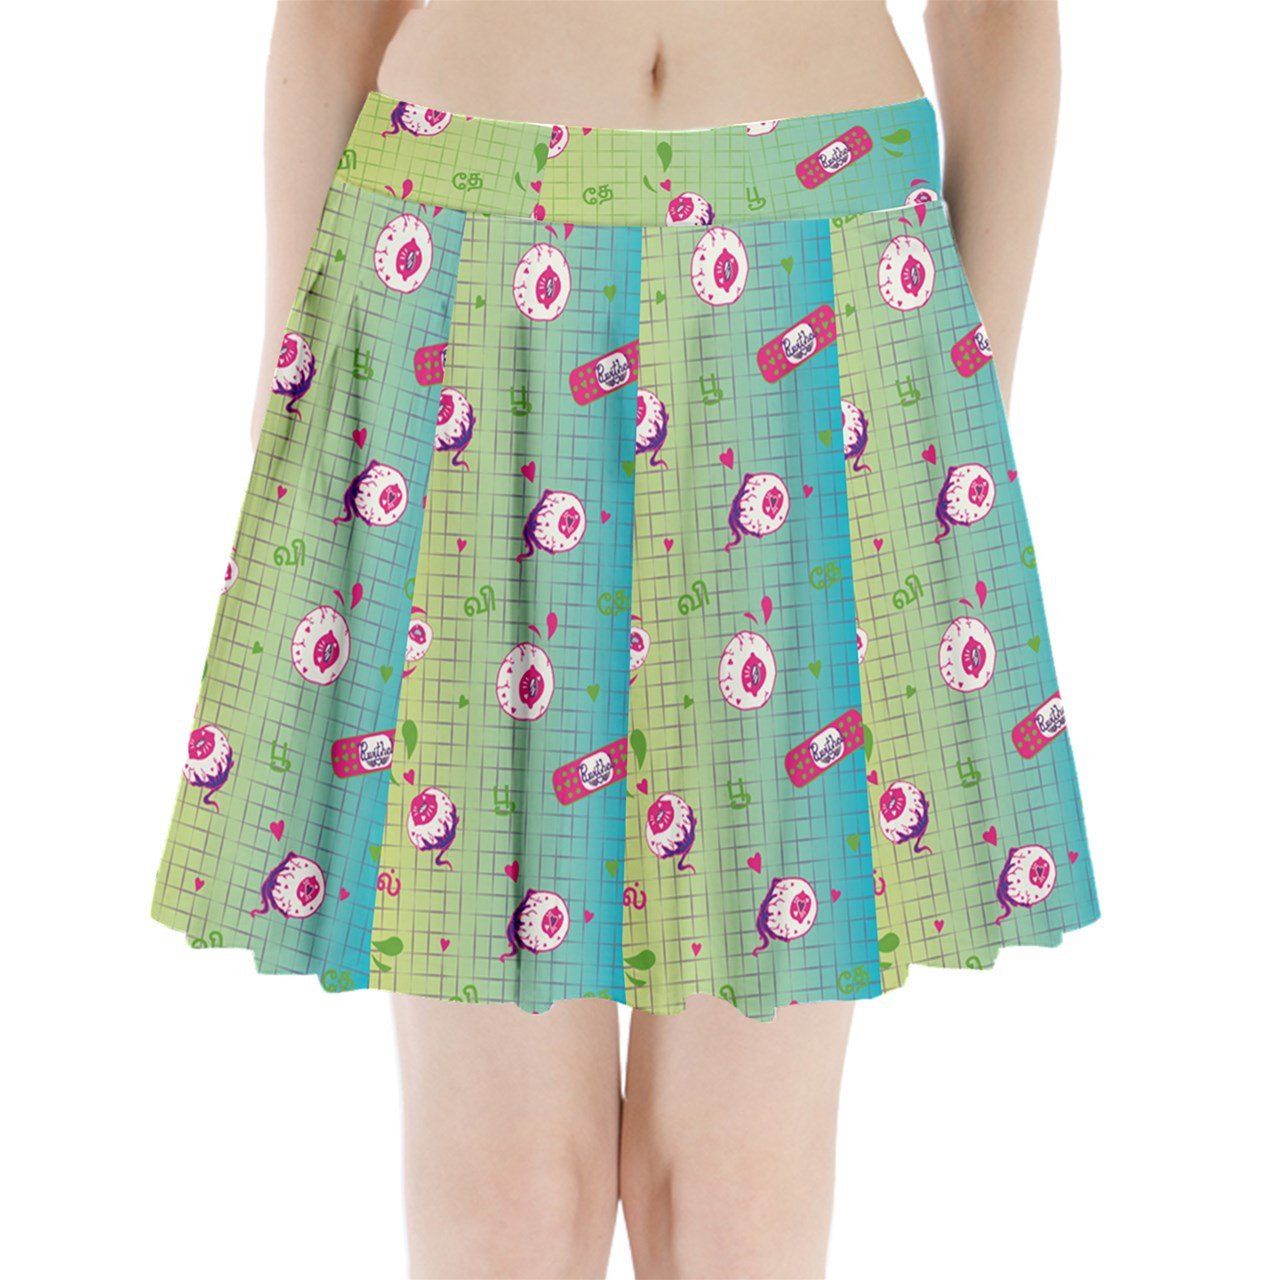 Some Bodies Pleated Skirt in Toxic Green - Lolita Collective